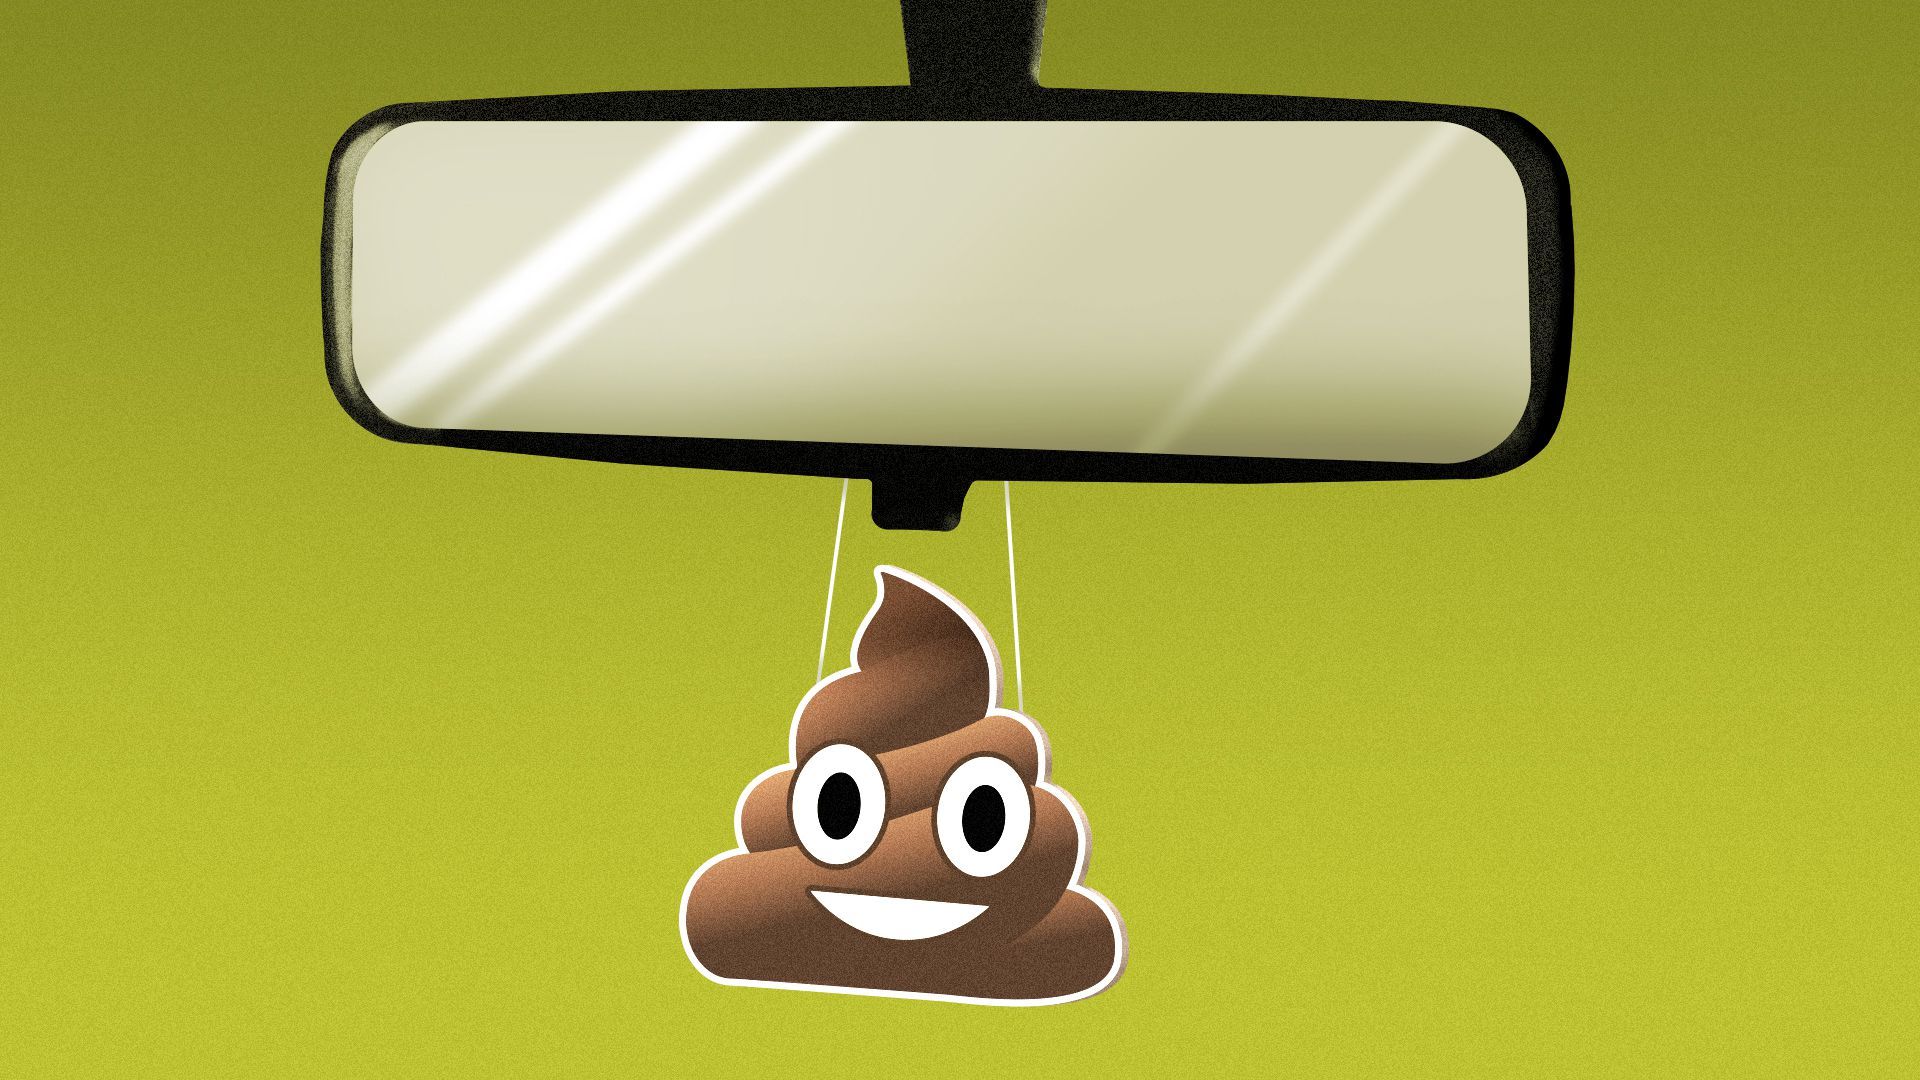 Illustration of a poop emoji air freshener hanging from a rearview mirror.